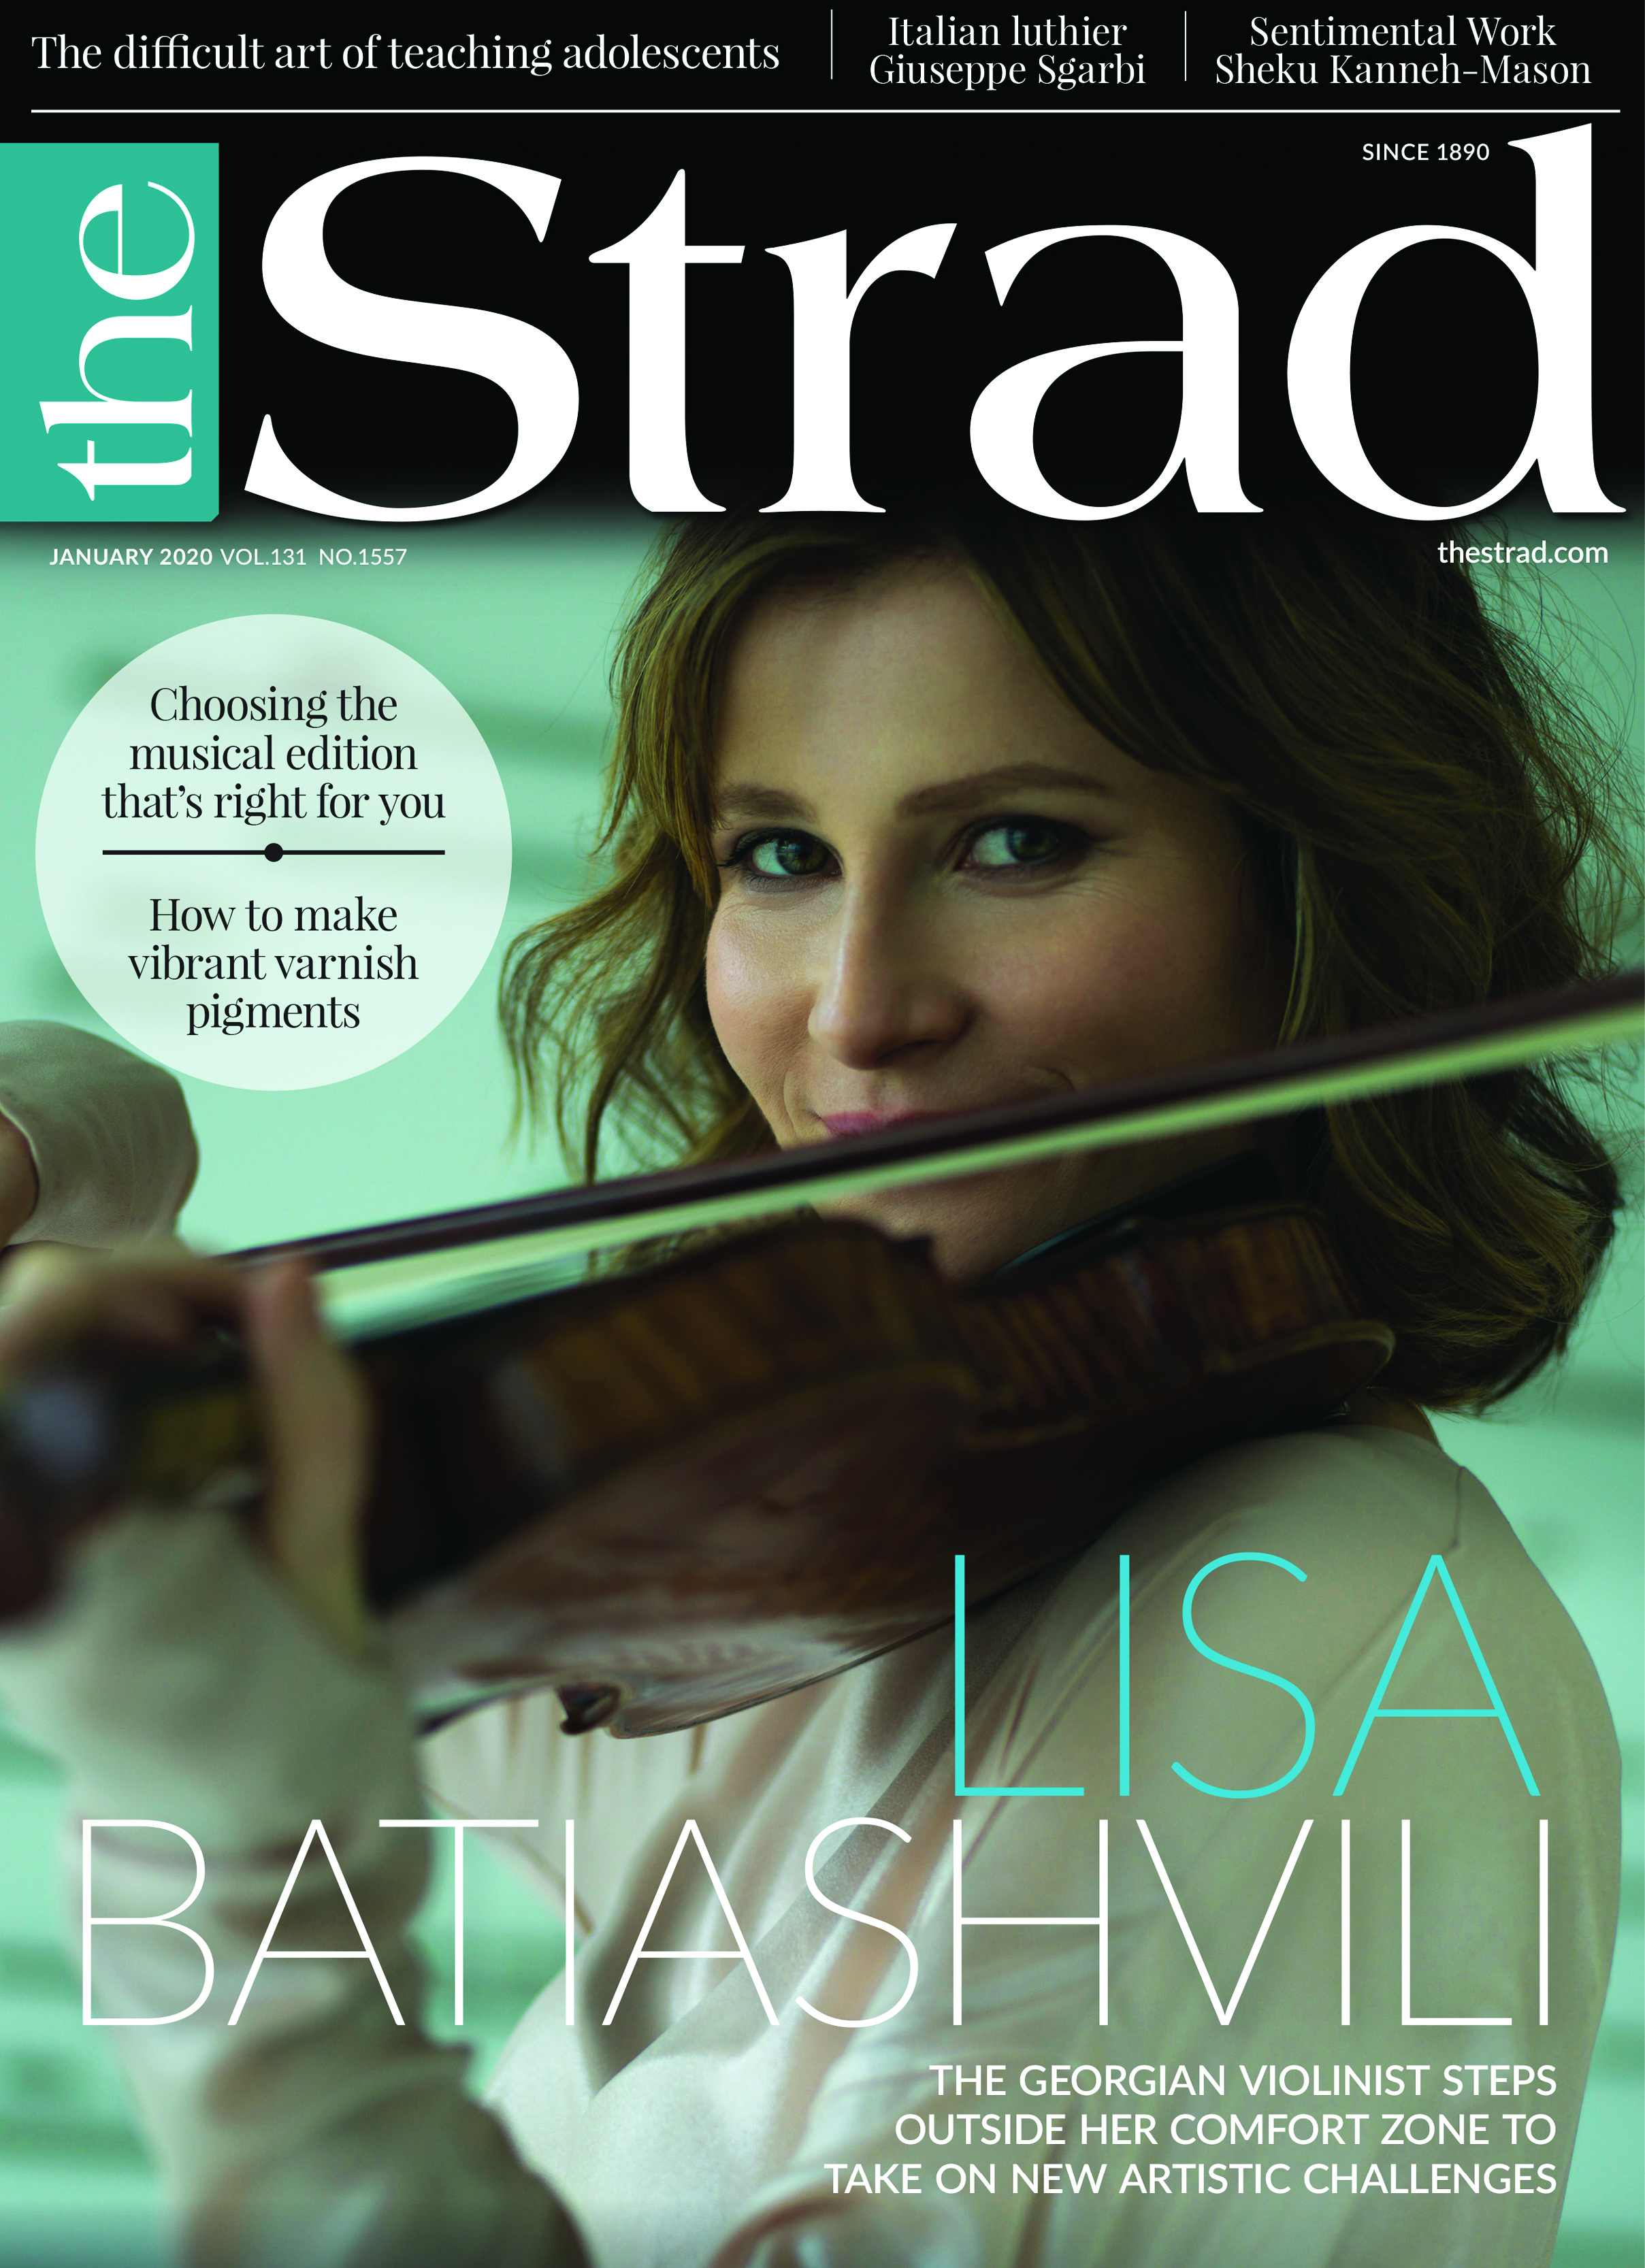 Georgian violinist Lisa Batiashvili discusses her latest projects, among them artistic directorship of the Audi Summer Concerts festival and performing on the soundtrack to The White Crow | January 2020 issue | The Strad